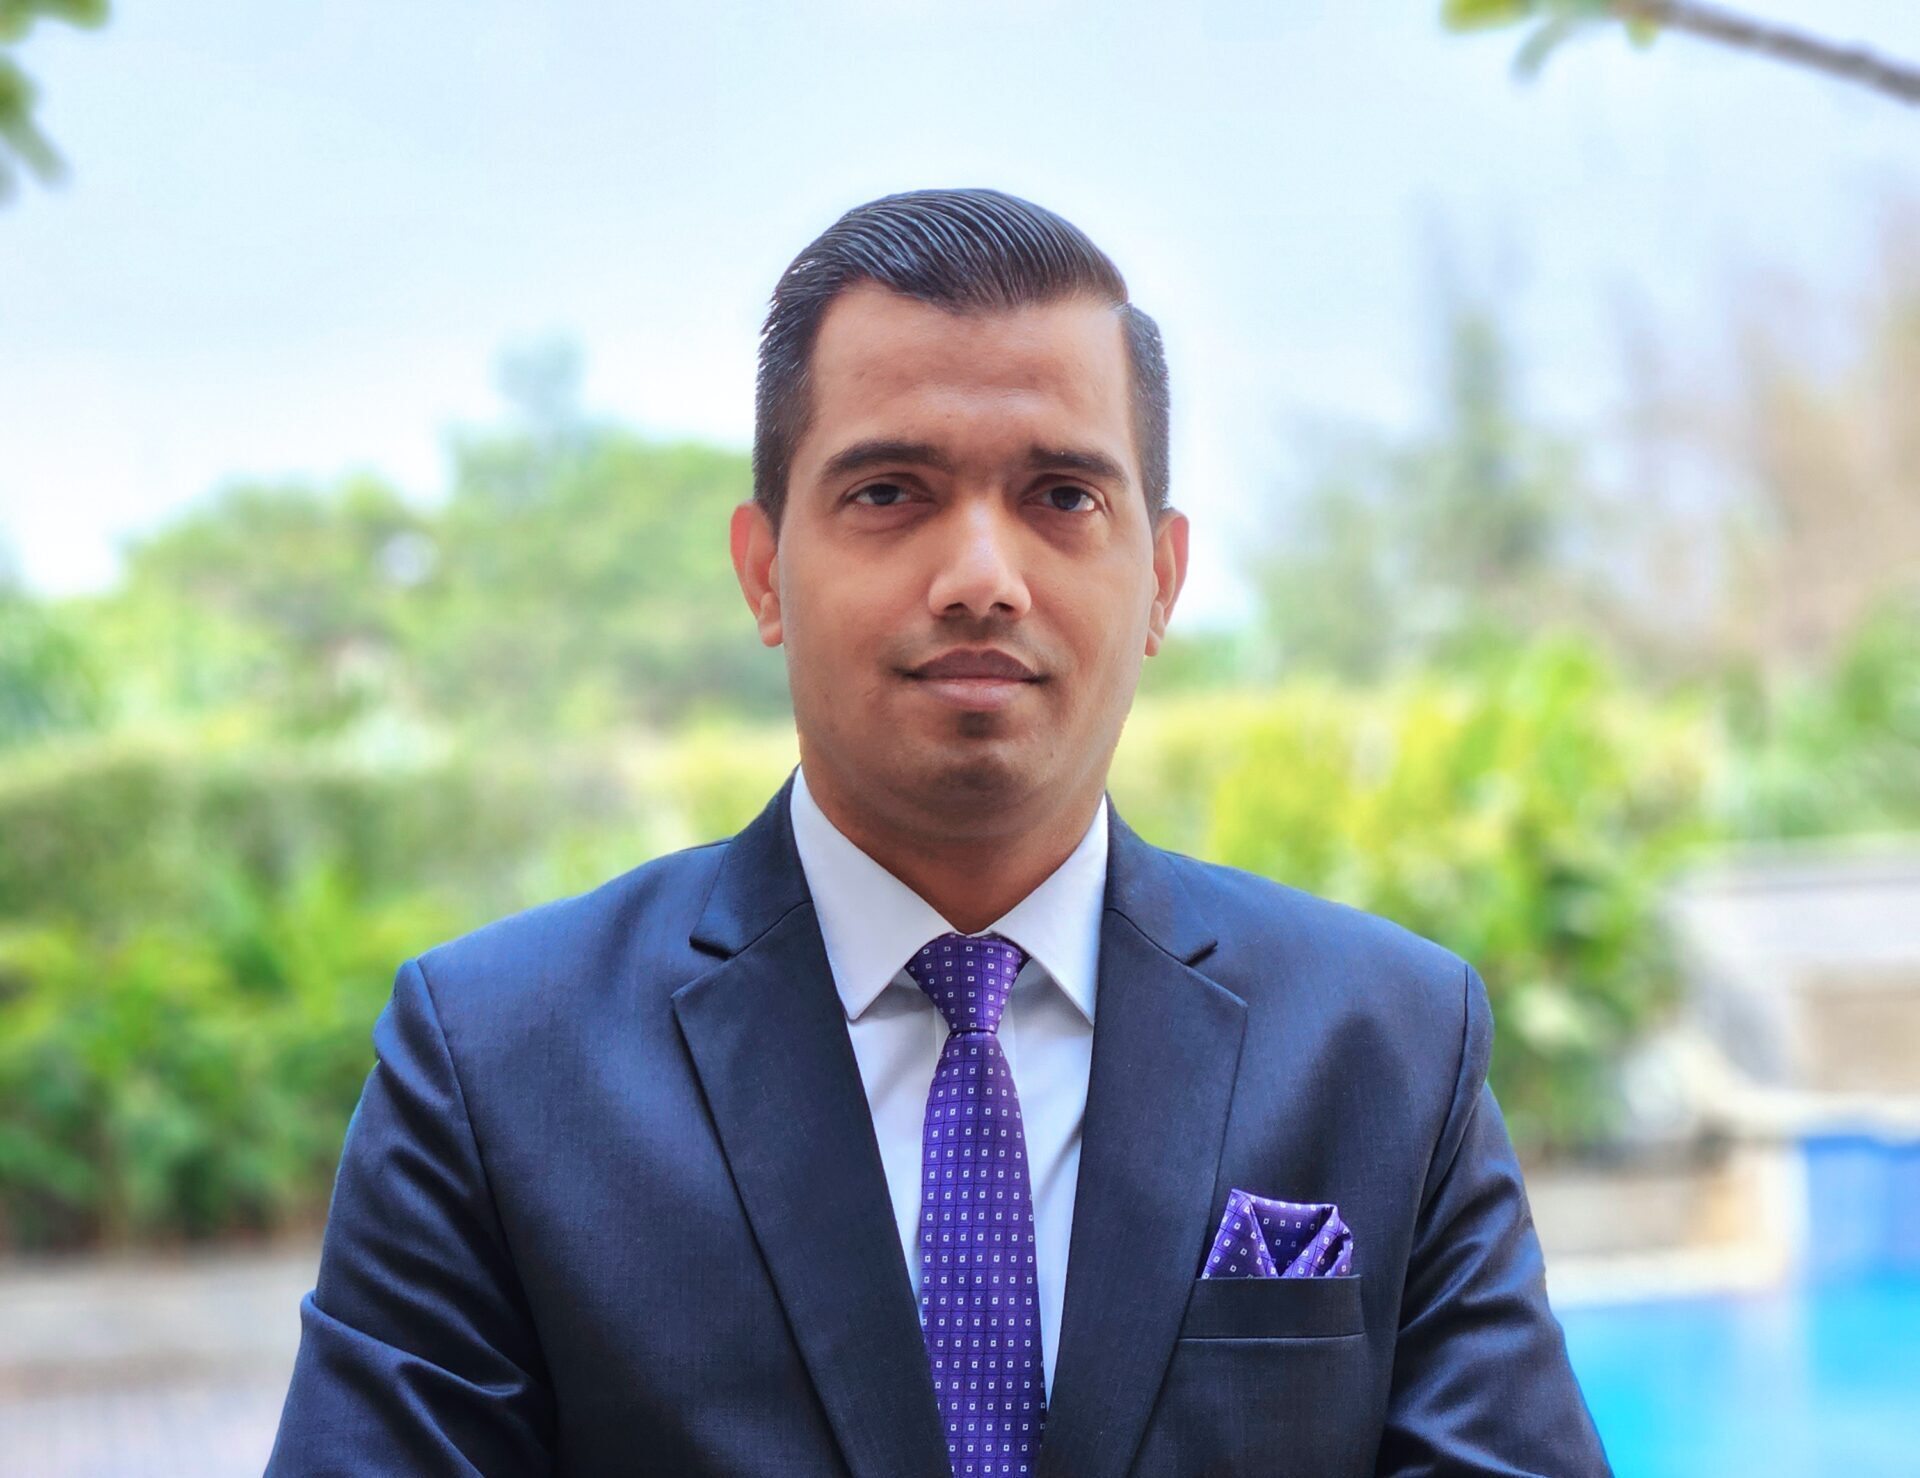 Rabindra Rai takes over as the Director of Operations at Courtyard by Marriott Bengaluru Outer Ring Road